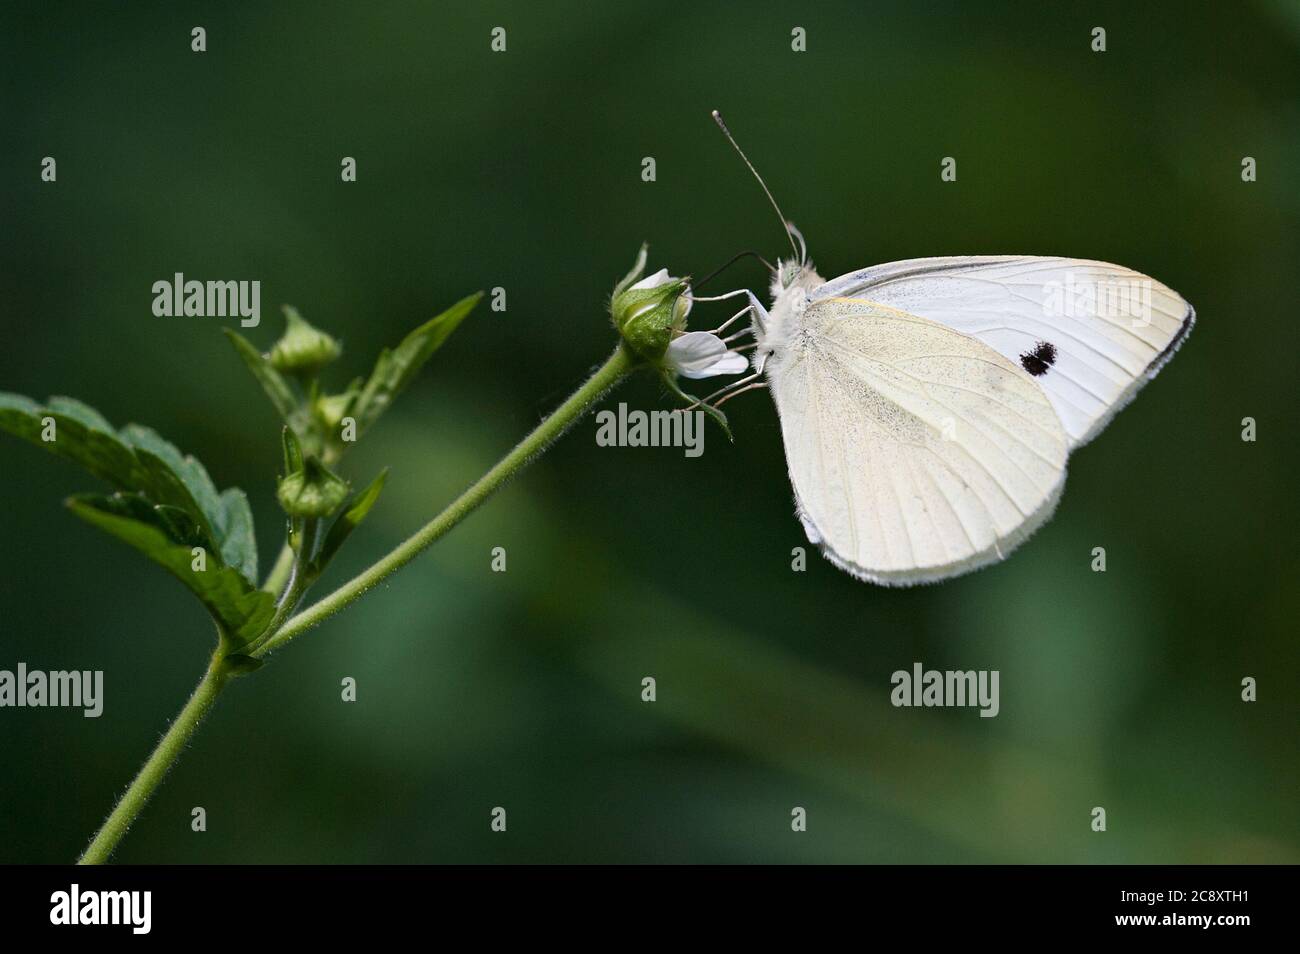 Cabbage white butterfly Stock Photo